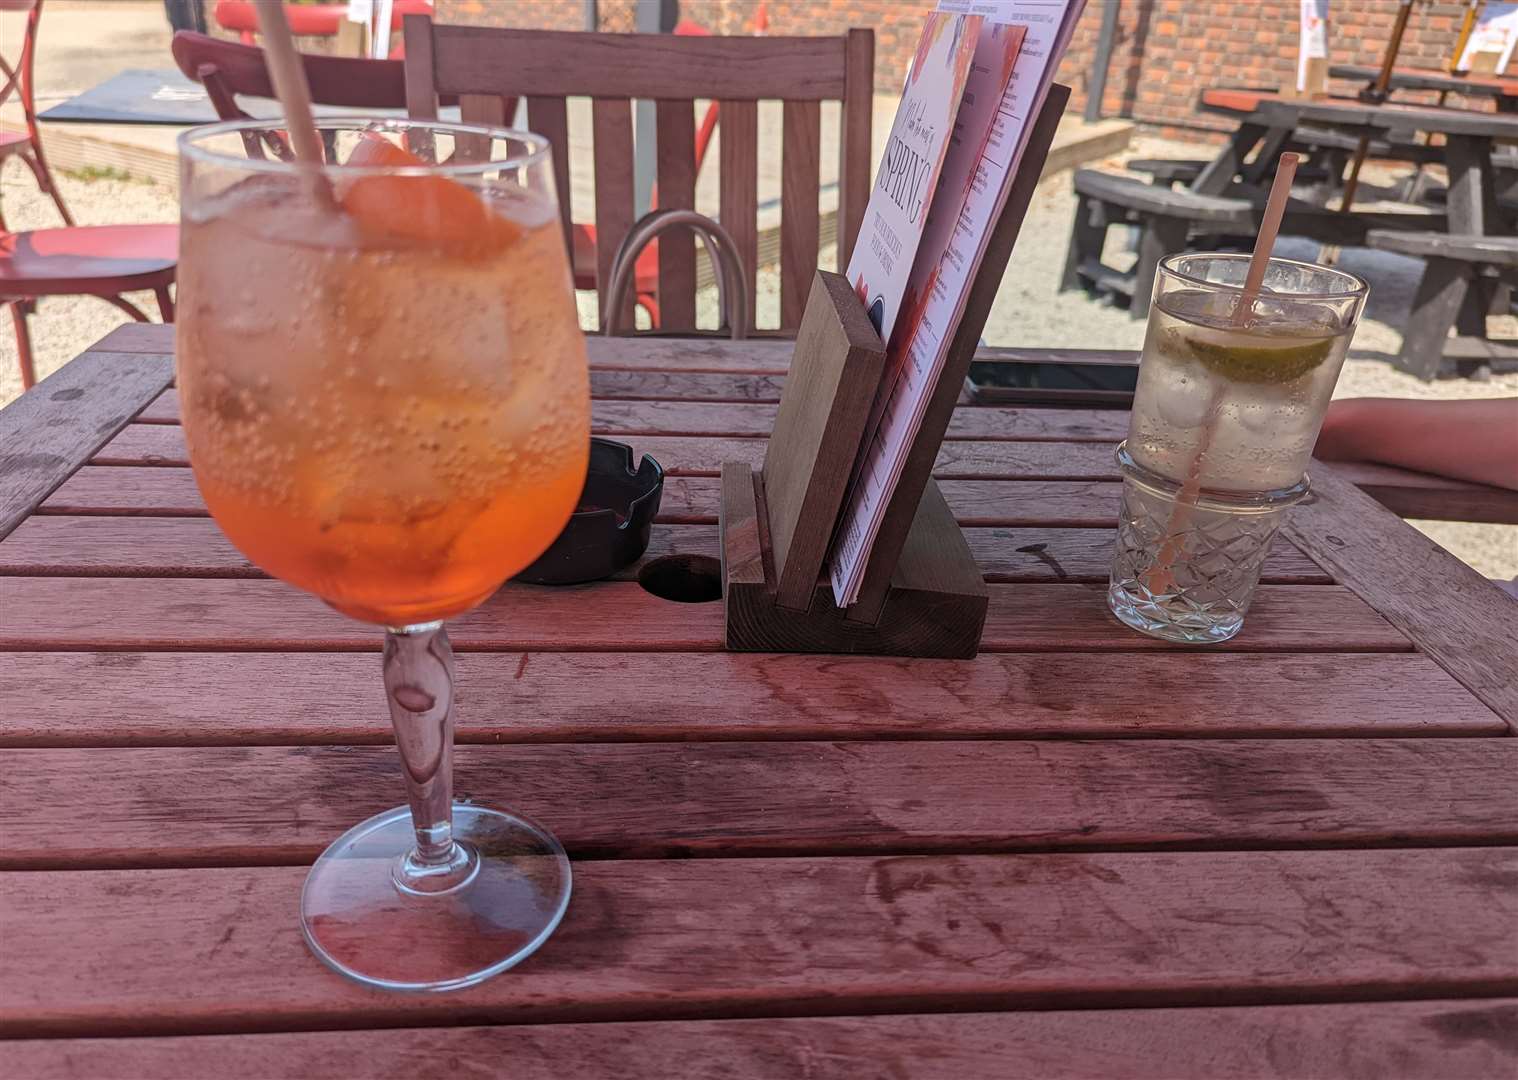 The Aperol Spritz went down a treat